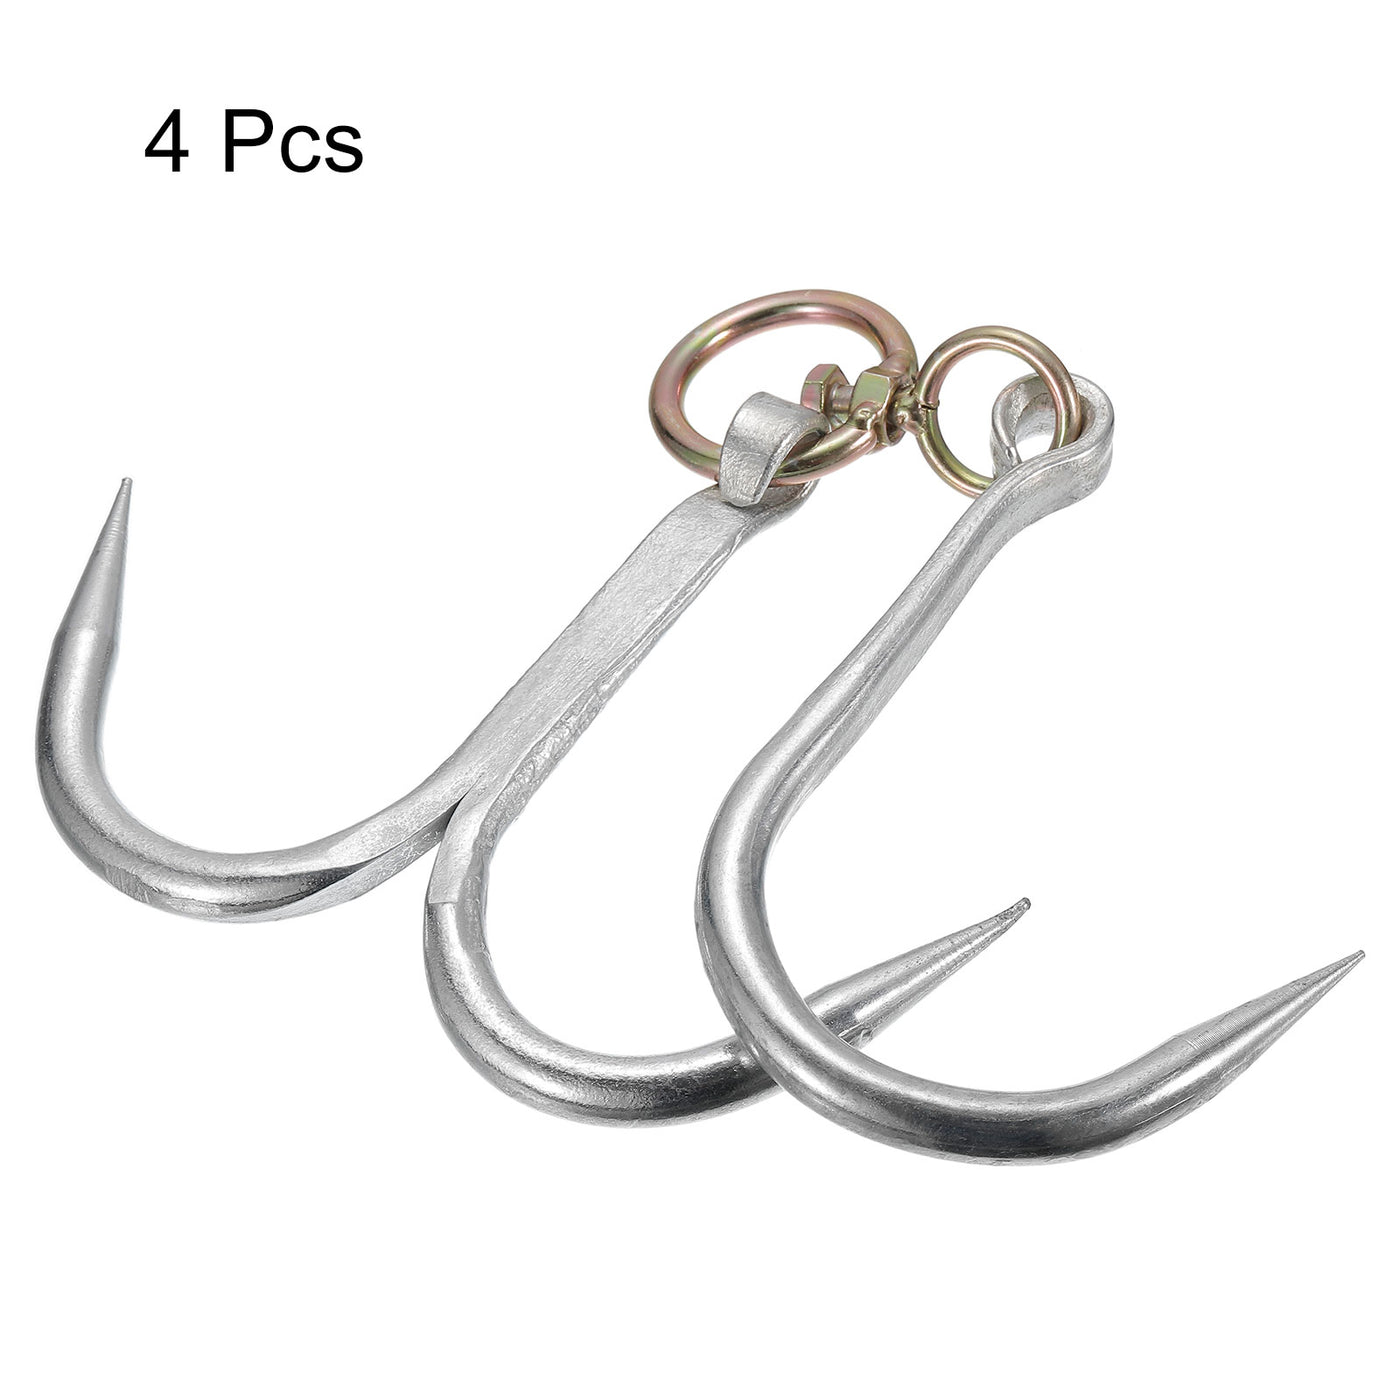 uxcell Uxcell Double Meat Hooks, Galvanized Swivel Meat Hook for Hanging Drying Smoking Meat